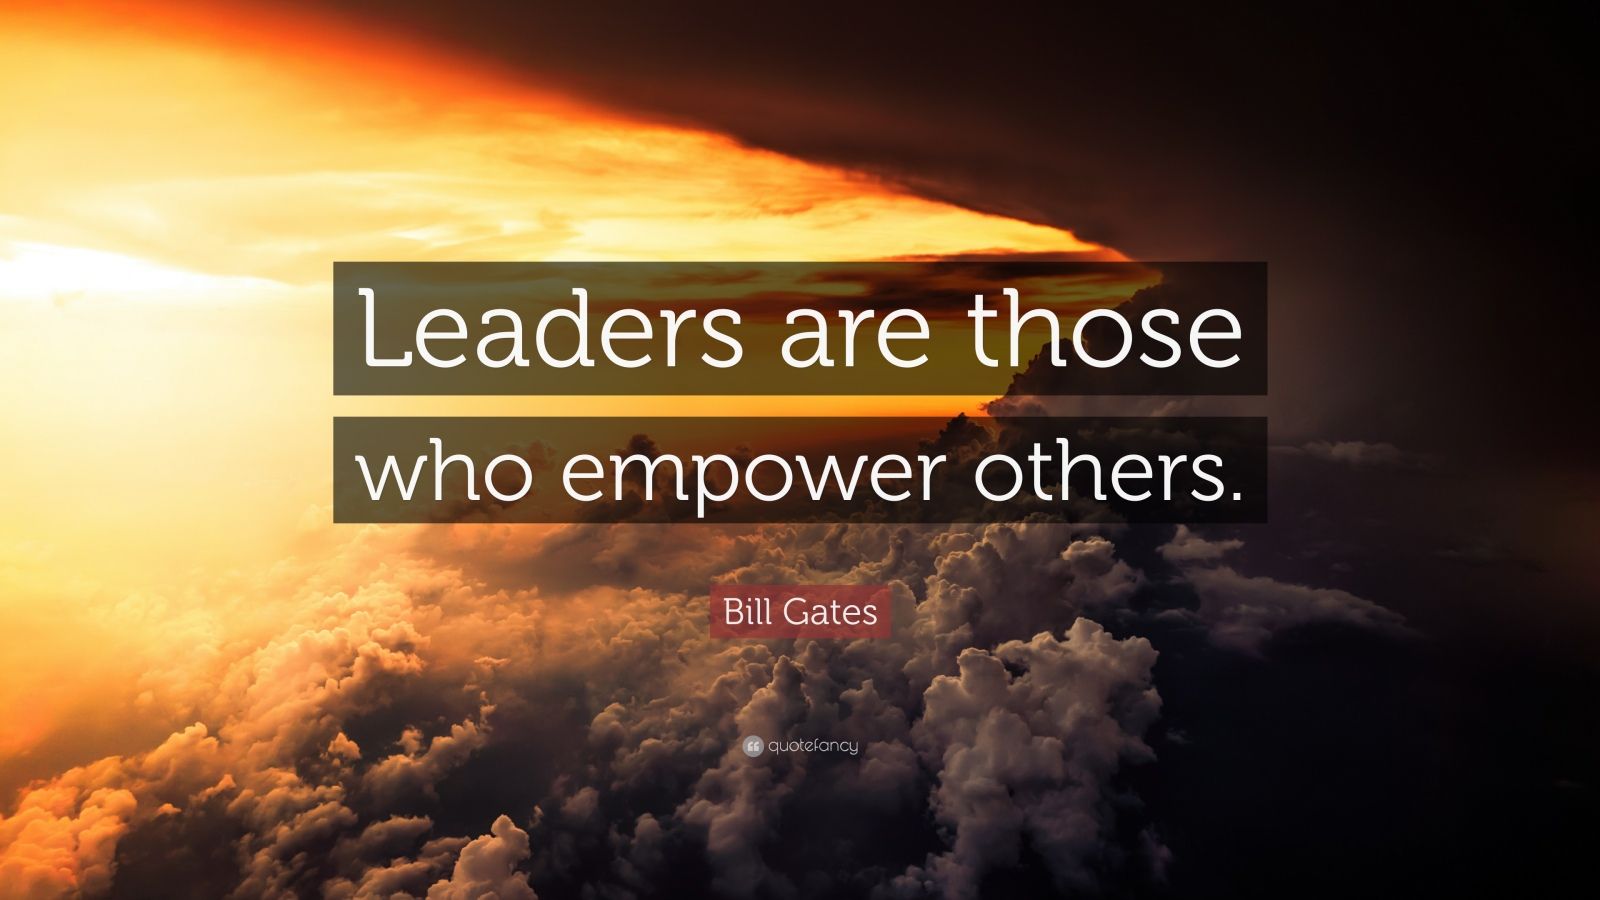 Bill Gates Quote: “Leaders are those who empower others.” (12